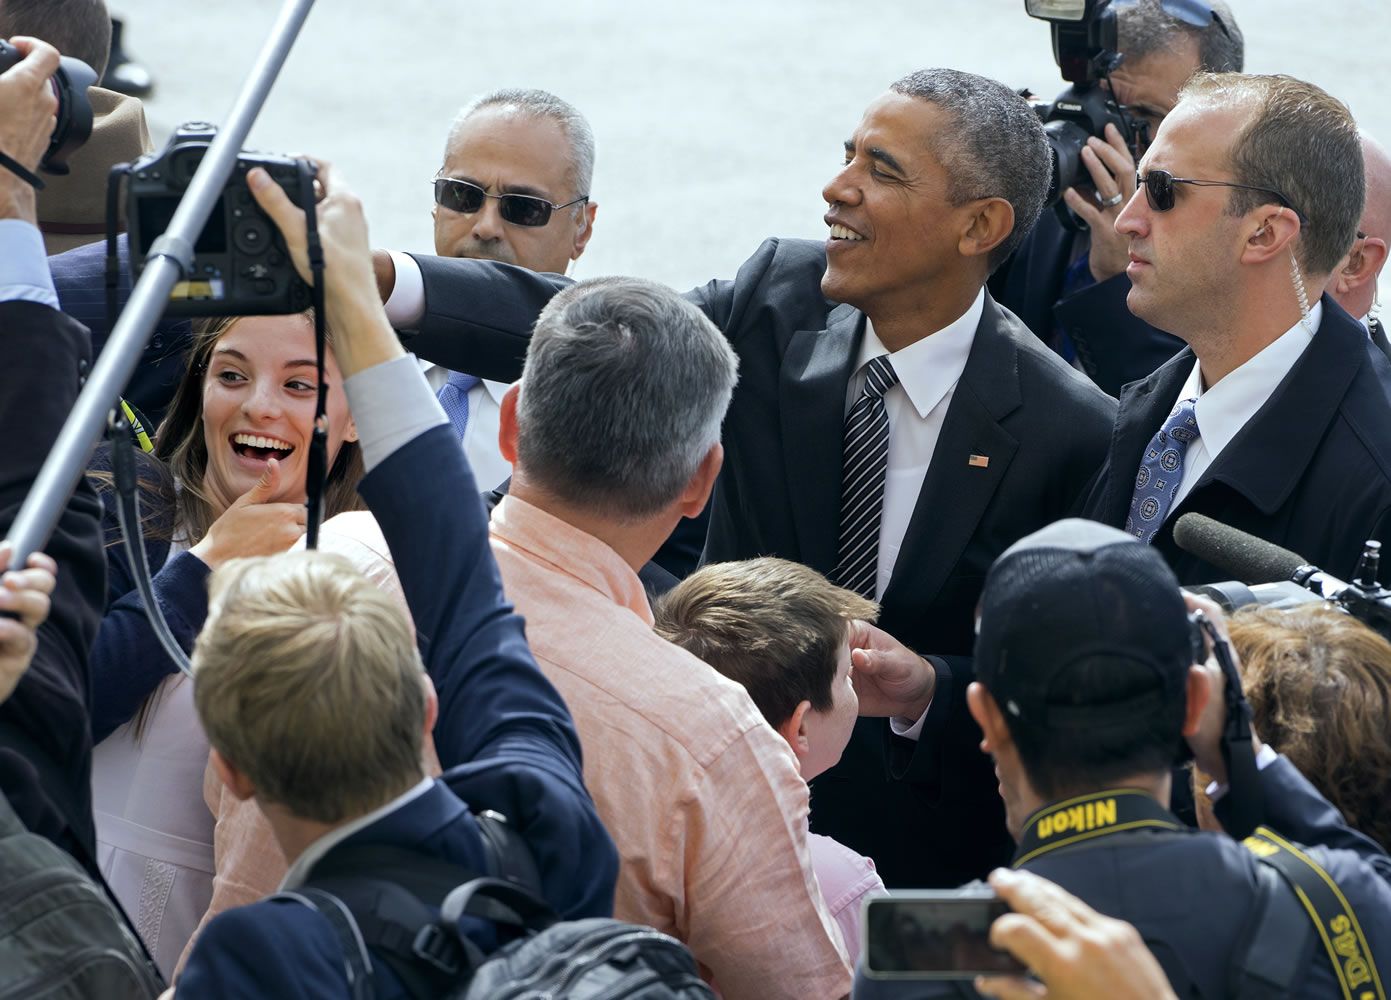 President Barack Obama greets guests Sunday after arriving at John F. Kennedy International Airport in New York.